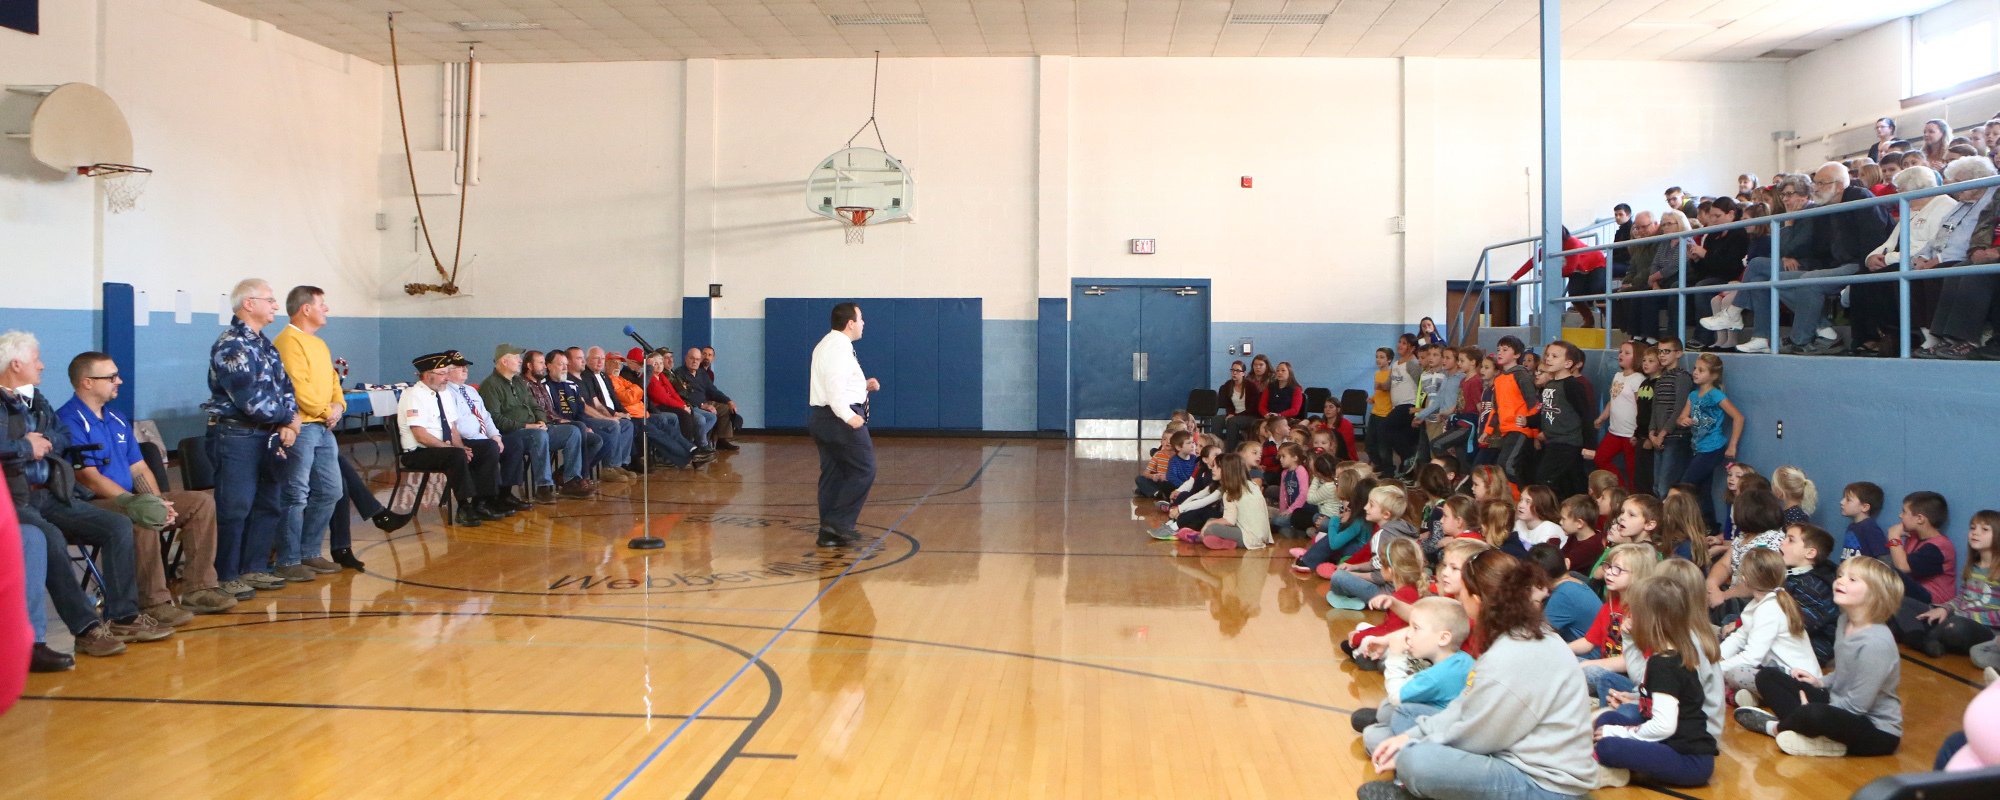 Veteran's Day assembly held at Webberville Elementary School, in Ingham County, Michigan.